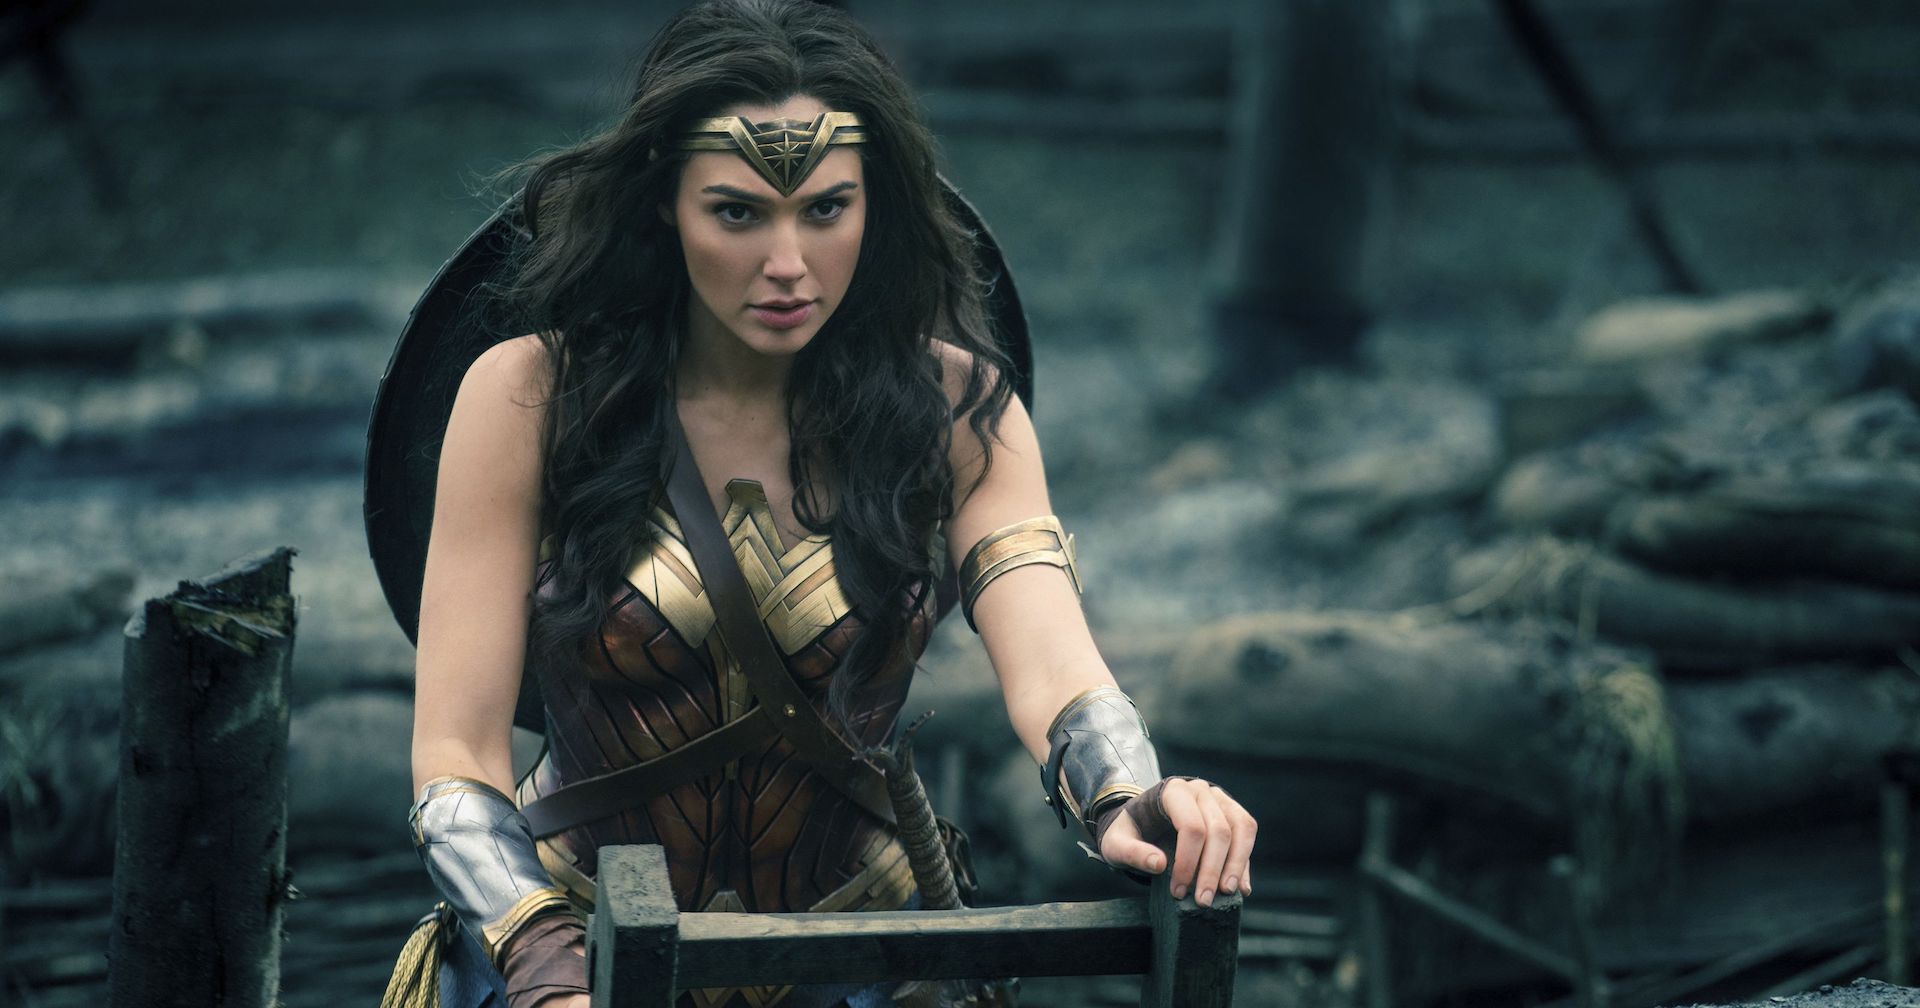 4 Surprising Lessons Digital Marketers Can Learn From Wonder Woman - YFS Magazine